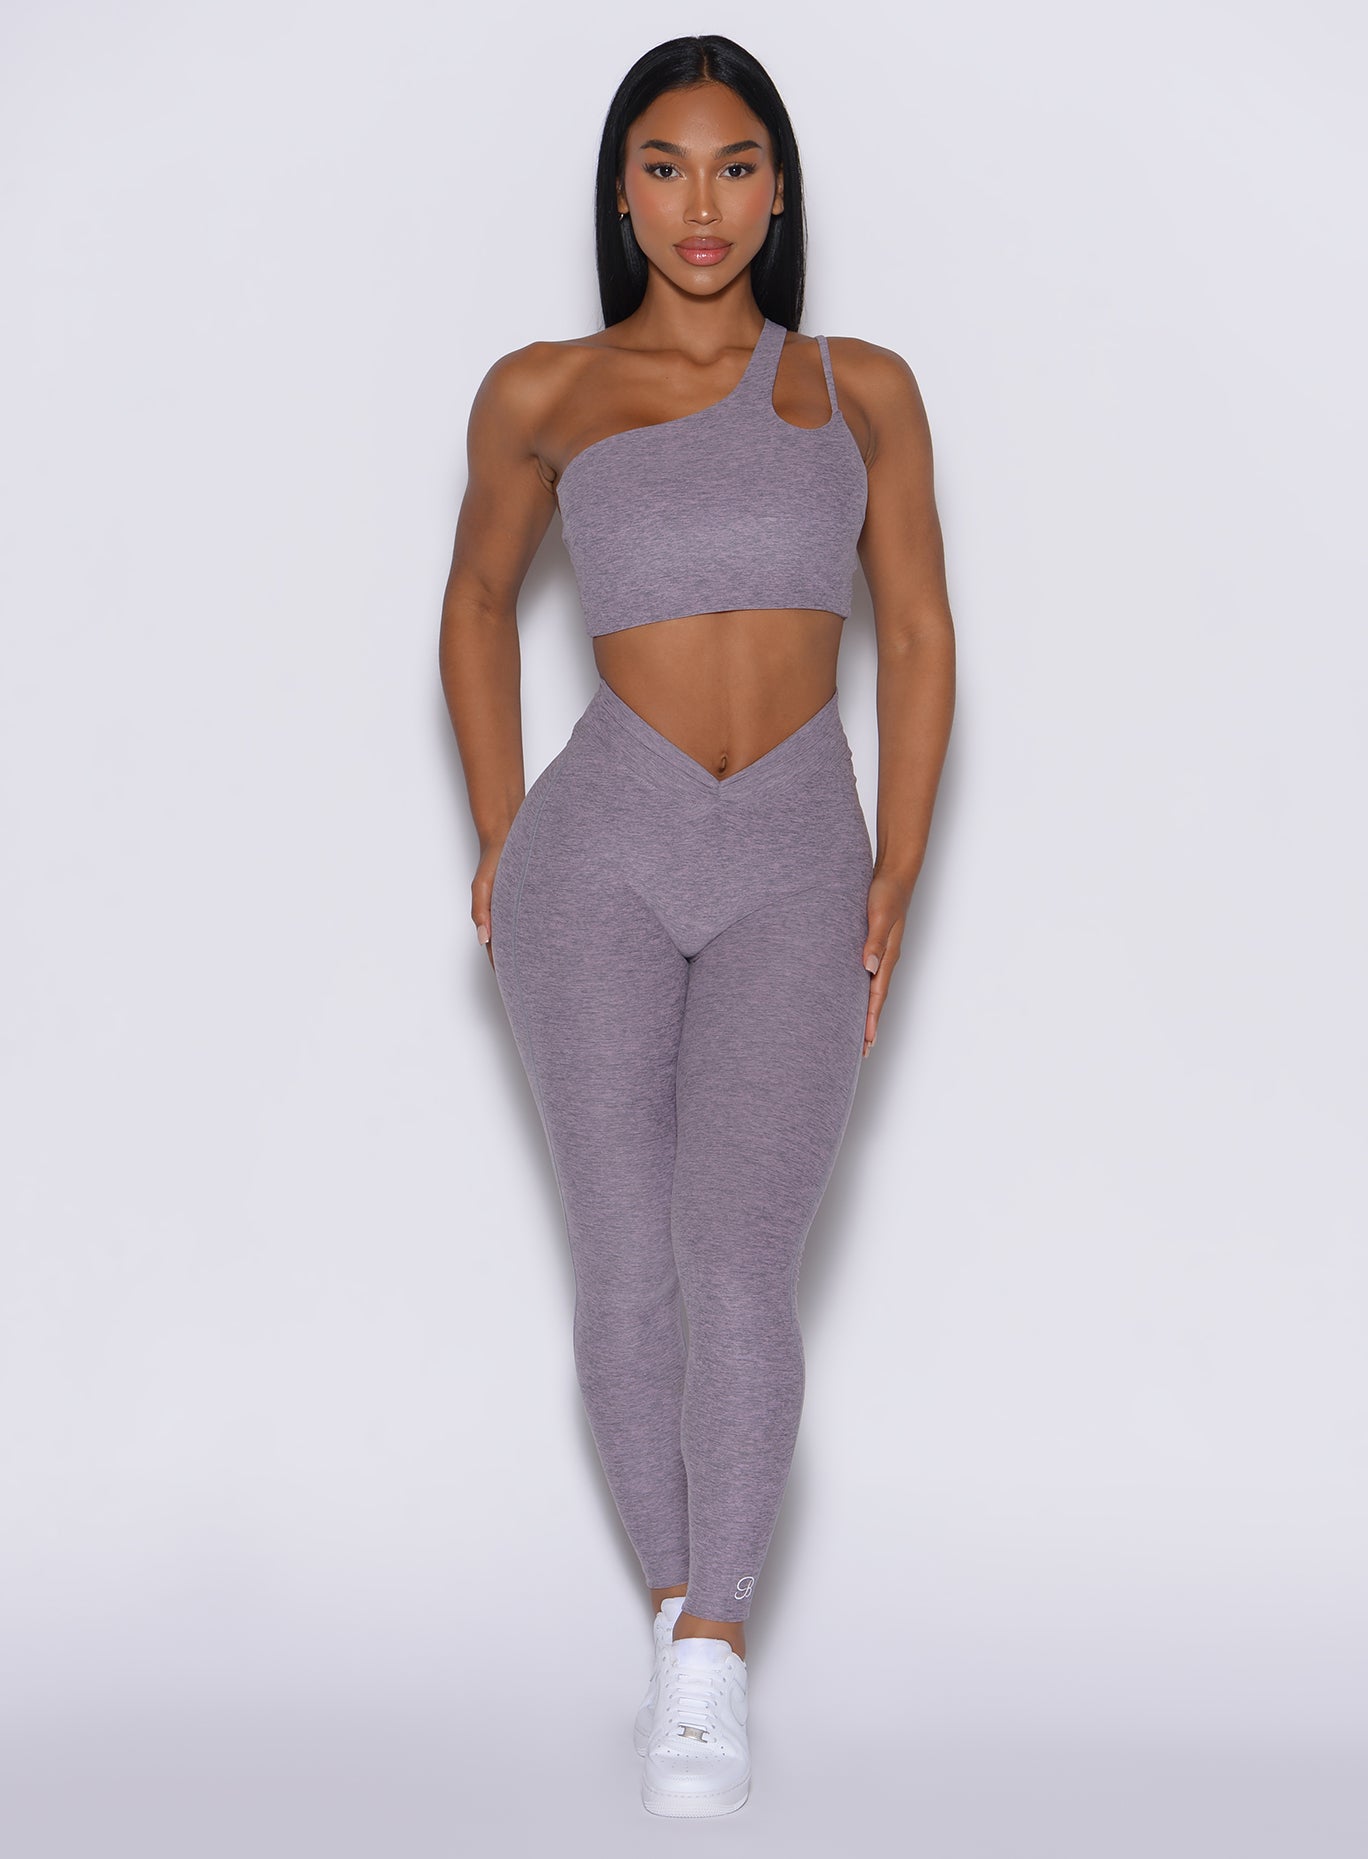 front profile view of a model wearing our V Active Leggings in lilac gray color along with the matching top